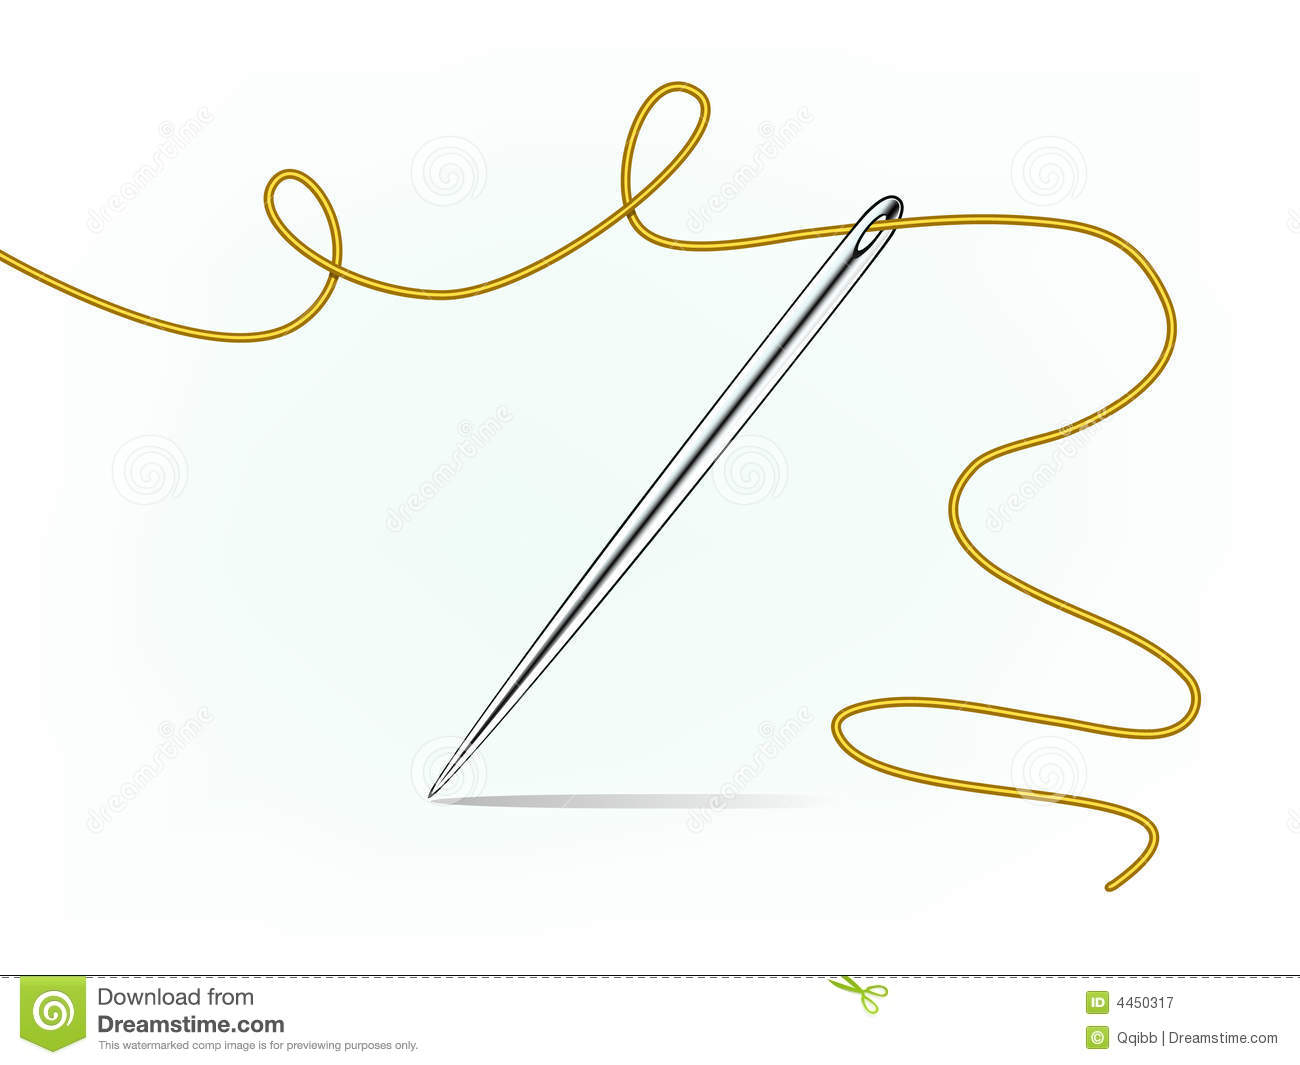 Clip Art Of Needle And Thread Royalty Free Stock Photography   Image    